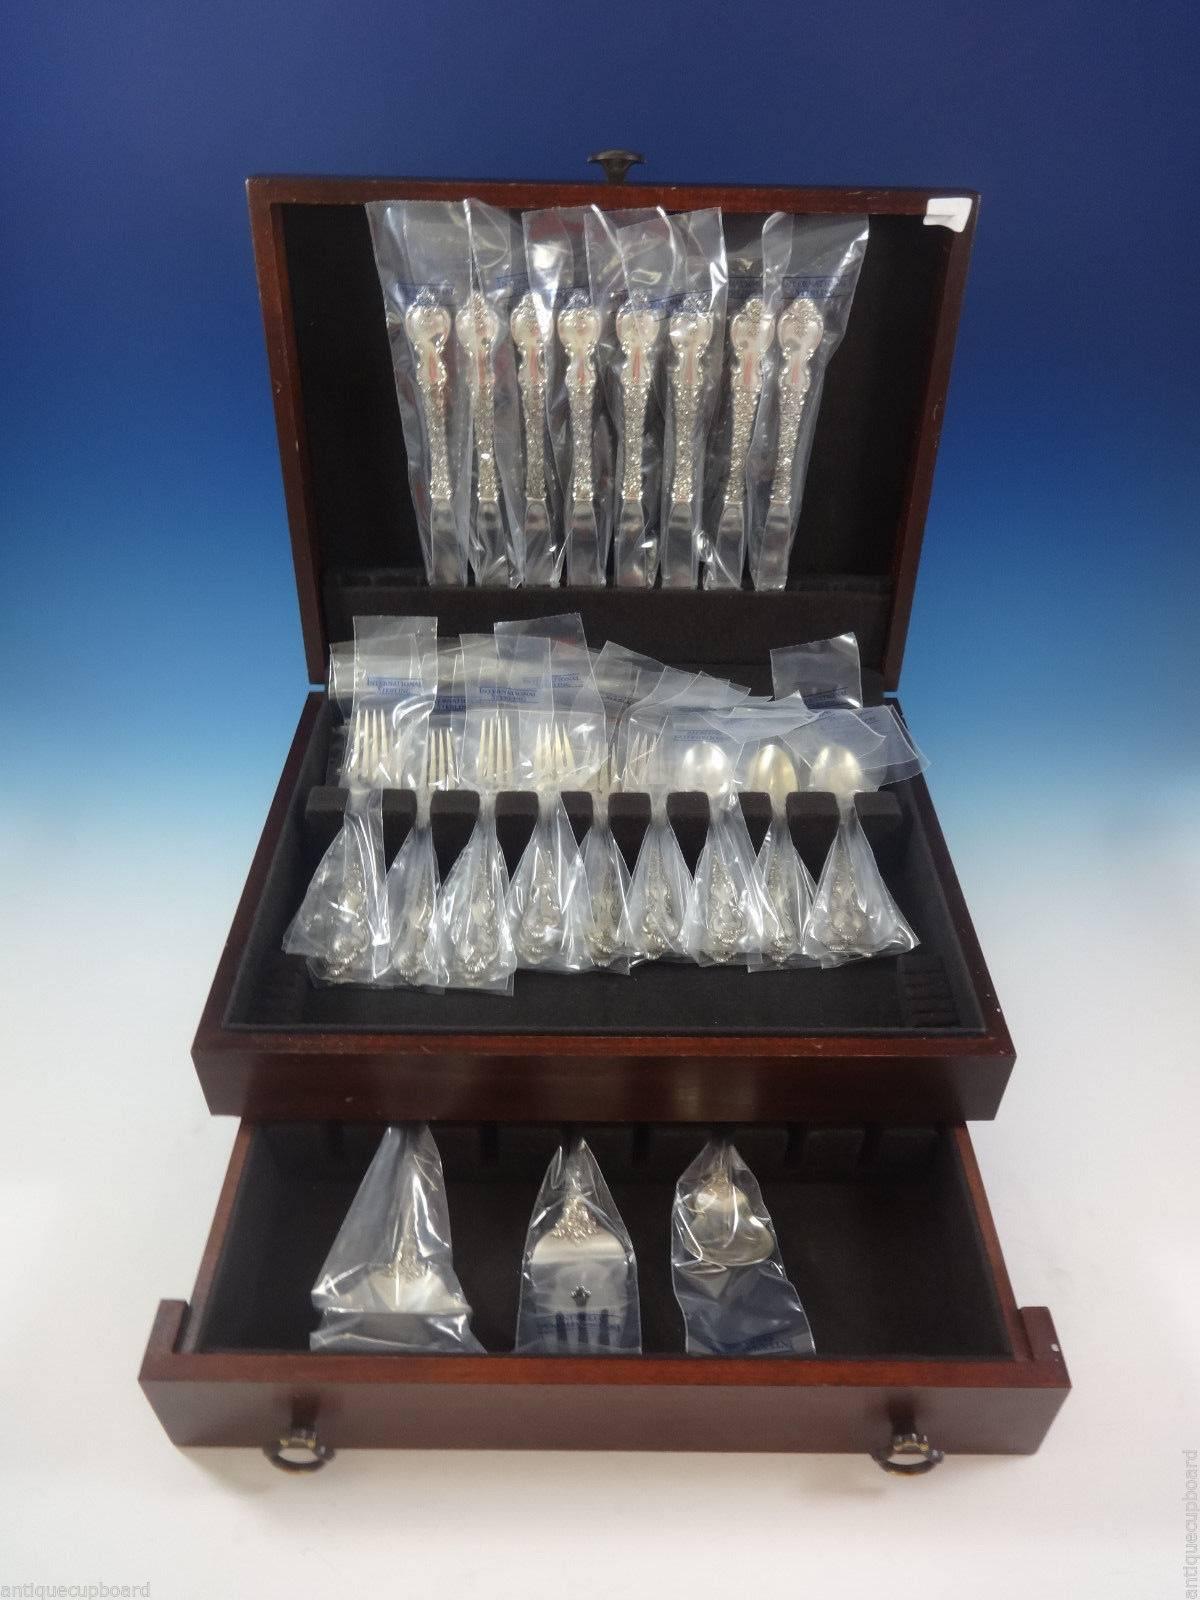 Du Barry by International sterling silver flatware set, 35 pieces, new and unused. The pieces are still in the factory sleeves! This set includes: Eight knives, 9